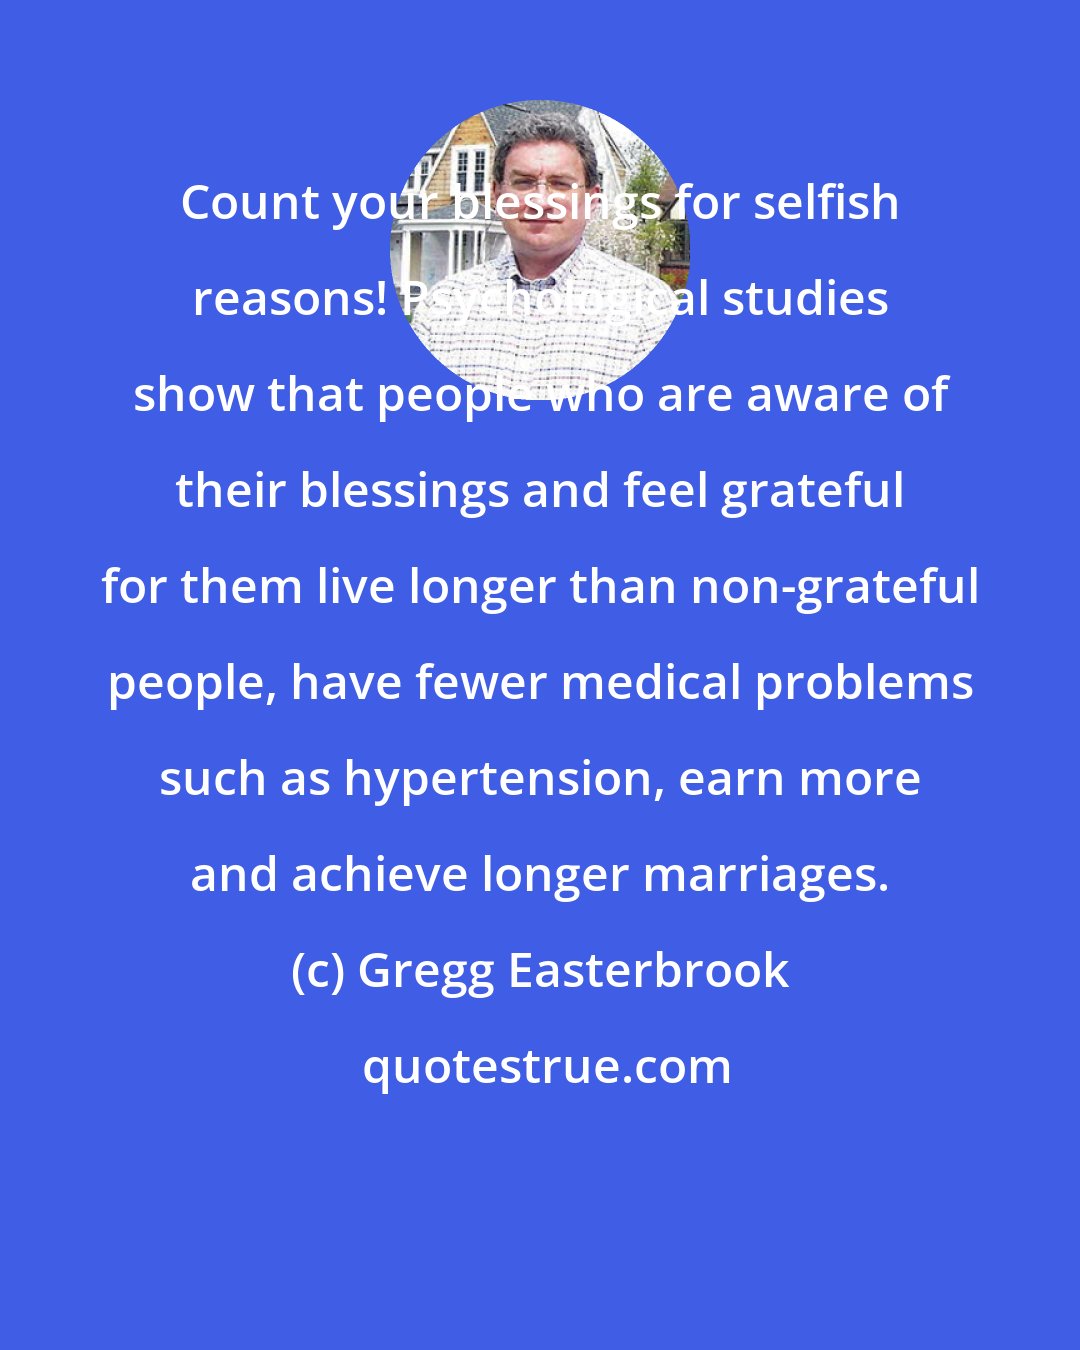 Gregg Easterbrook: Count your blessings for selfish reasons! Psychological studies show that people who are aware of their blessings and feel grateful for them live longer than non-grateful people, have fewer medical problems such as hypertension, earn more and achieve longer marriages.